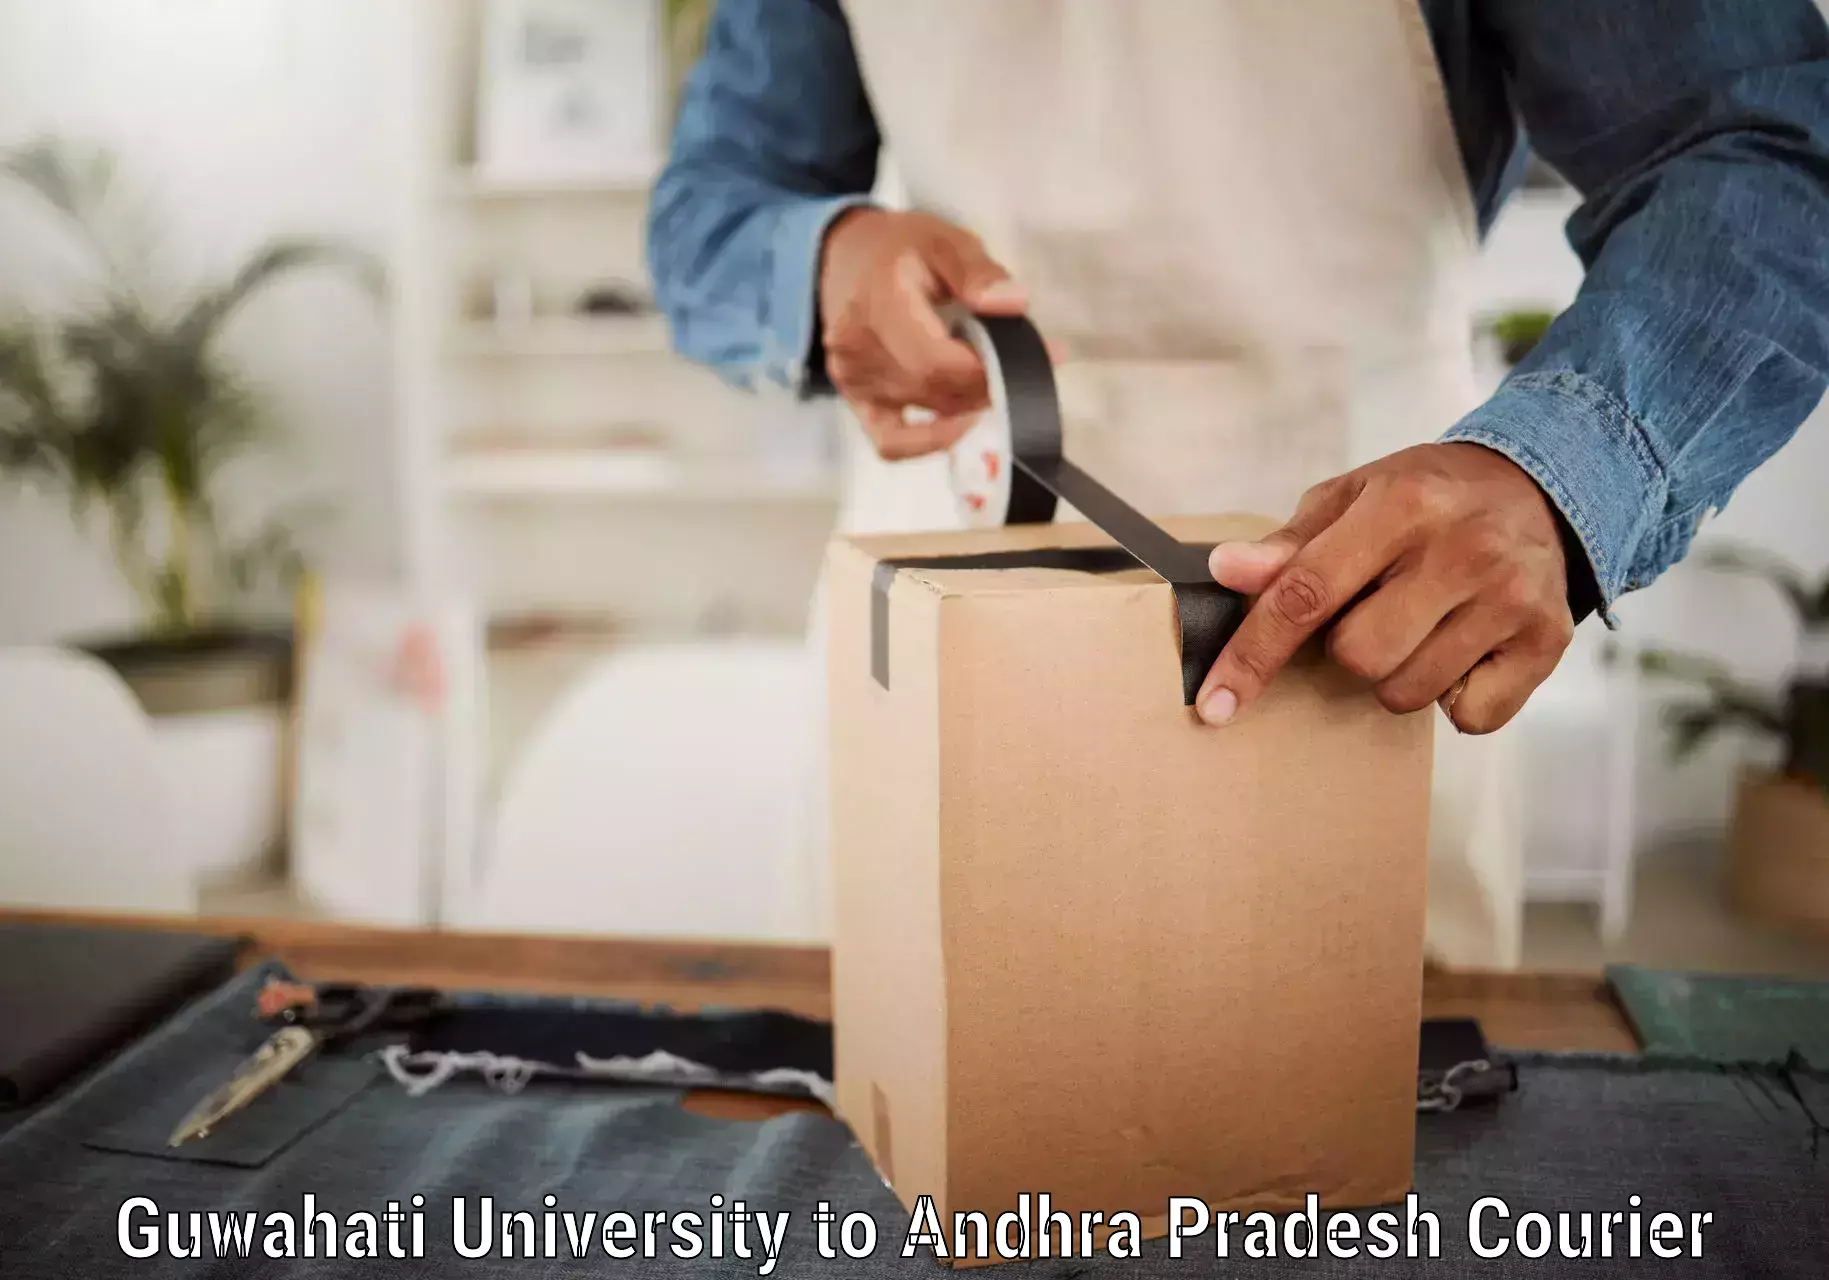 Reliable parcel services Guwahati University to Chagalamarri